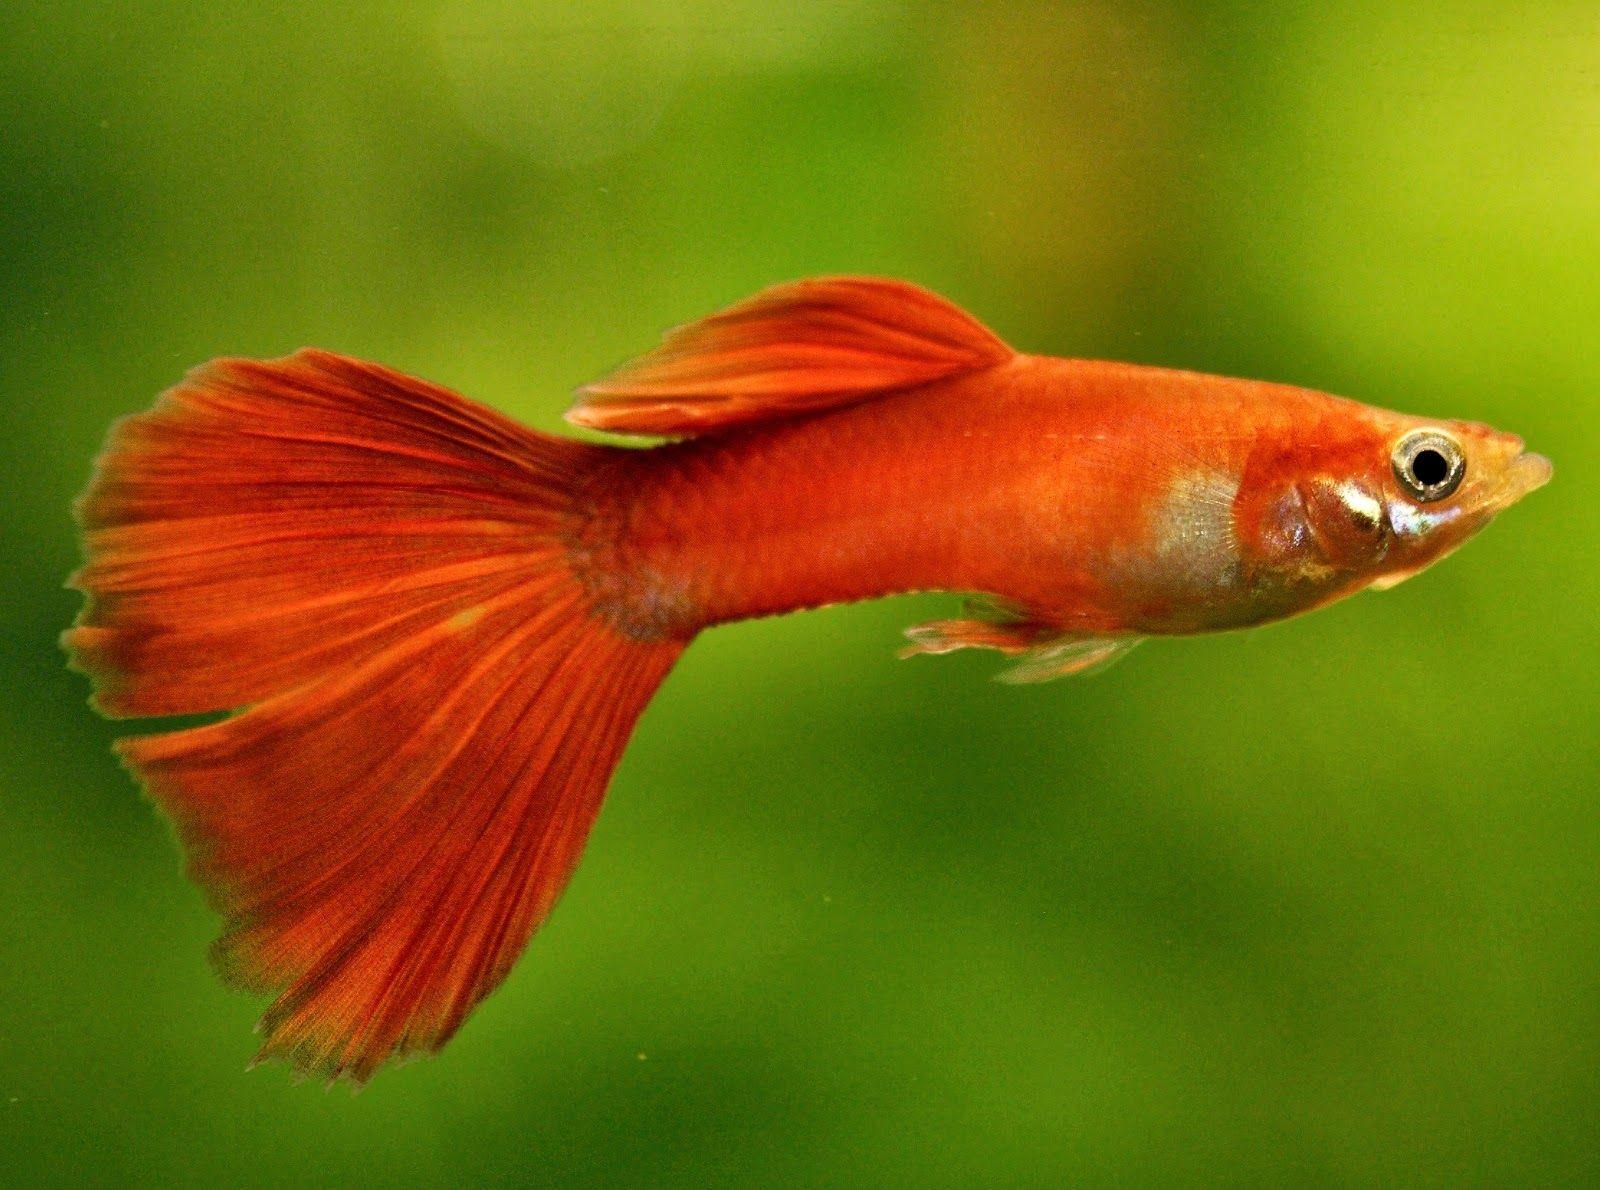 Wallpaper  1873x1150 px fish guppy tropical 1873x1150  CoolWallpapers   1650121  HD Wallpapers  WallHere